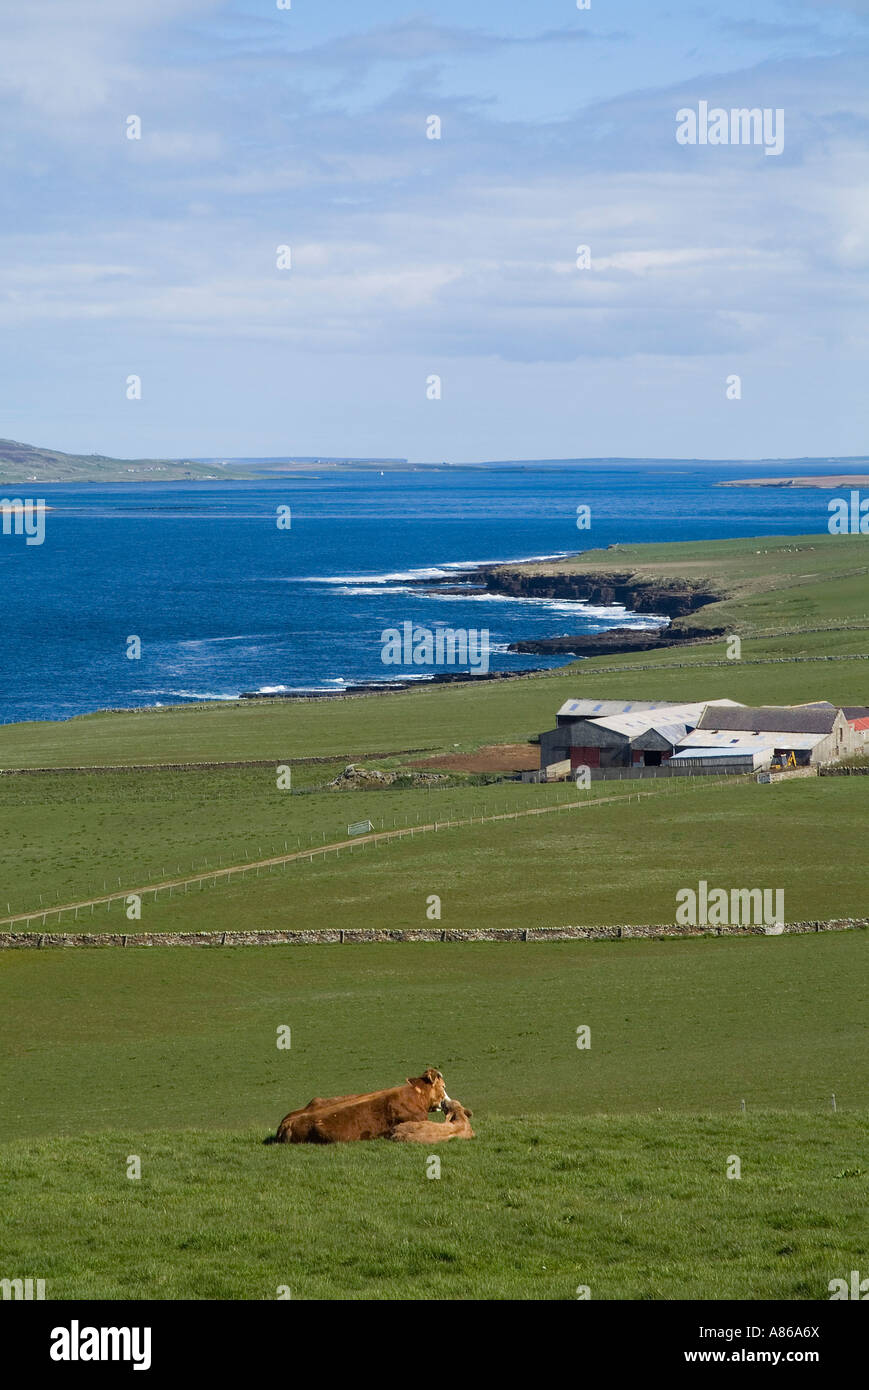 dh Eynhallow Sound EVIE ORKNEY Cattle farm animals Eynhallow Sounds north coast field scottish Cow beef Stock Photo